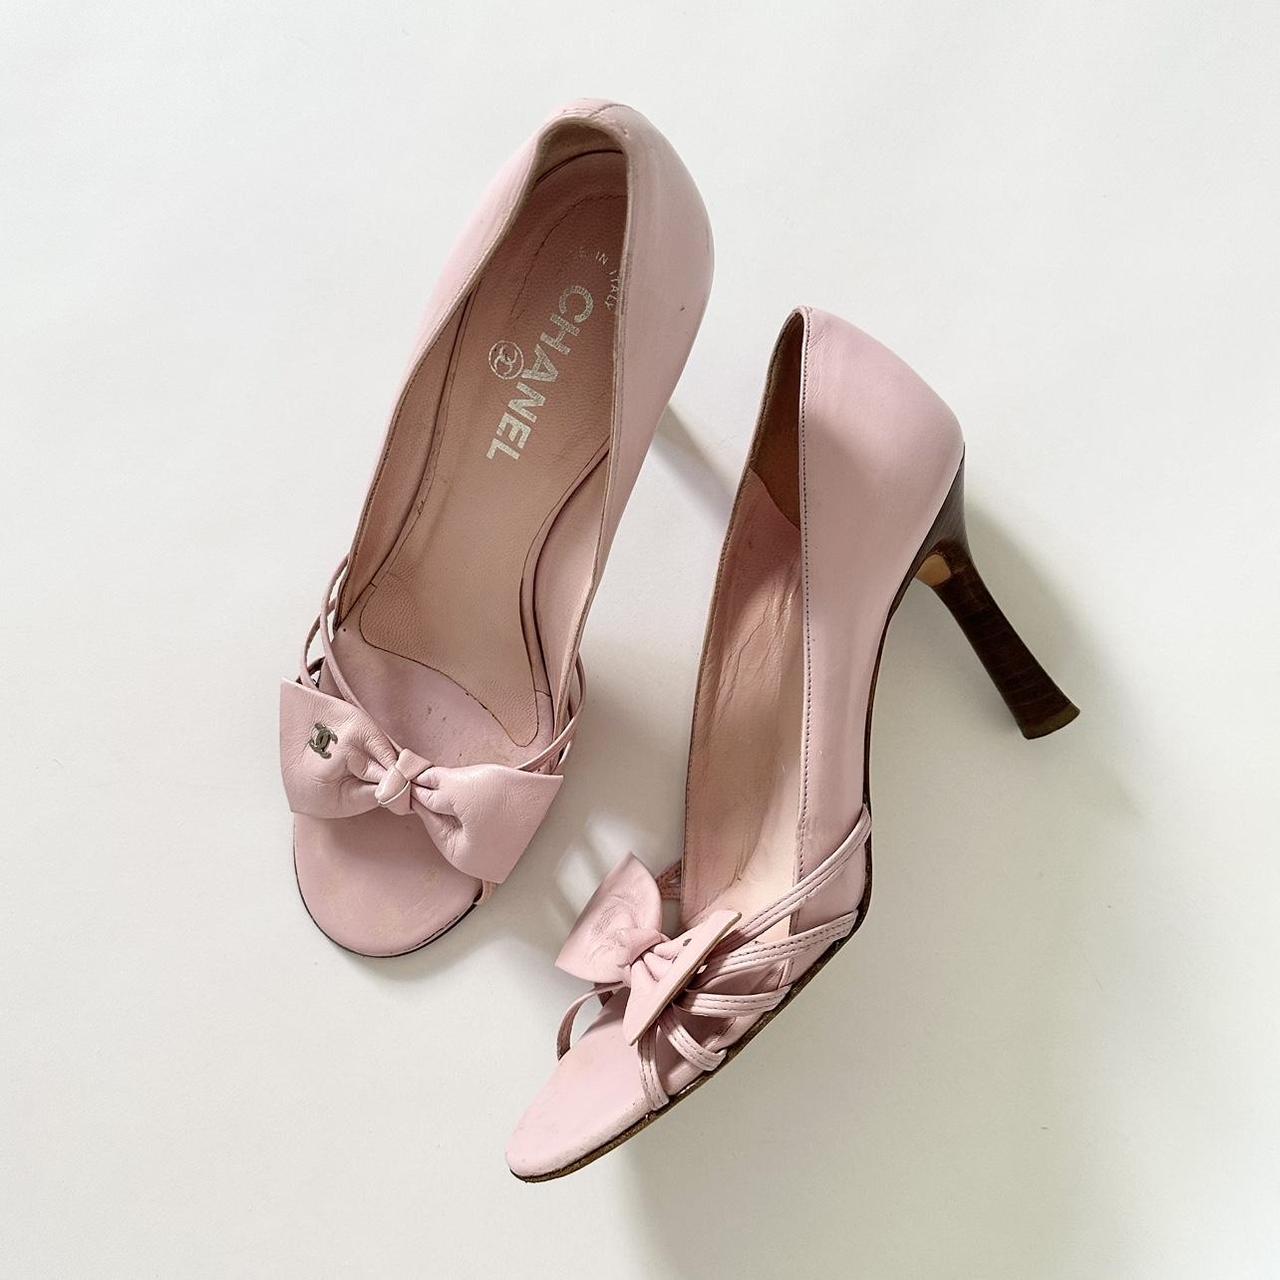 CHANEL, Shoes, Chanel Pink Bow Heels